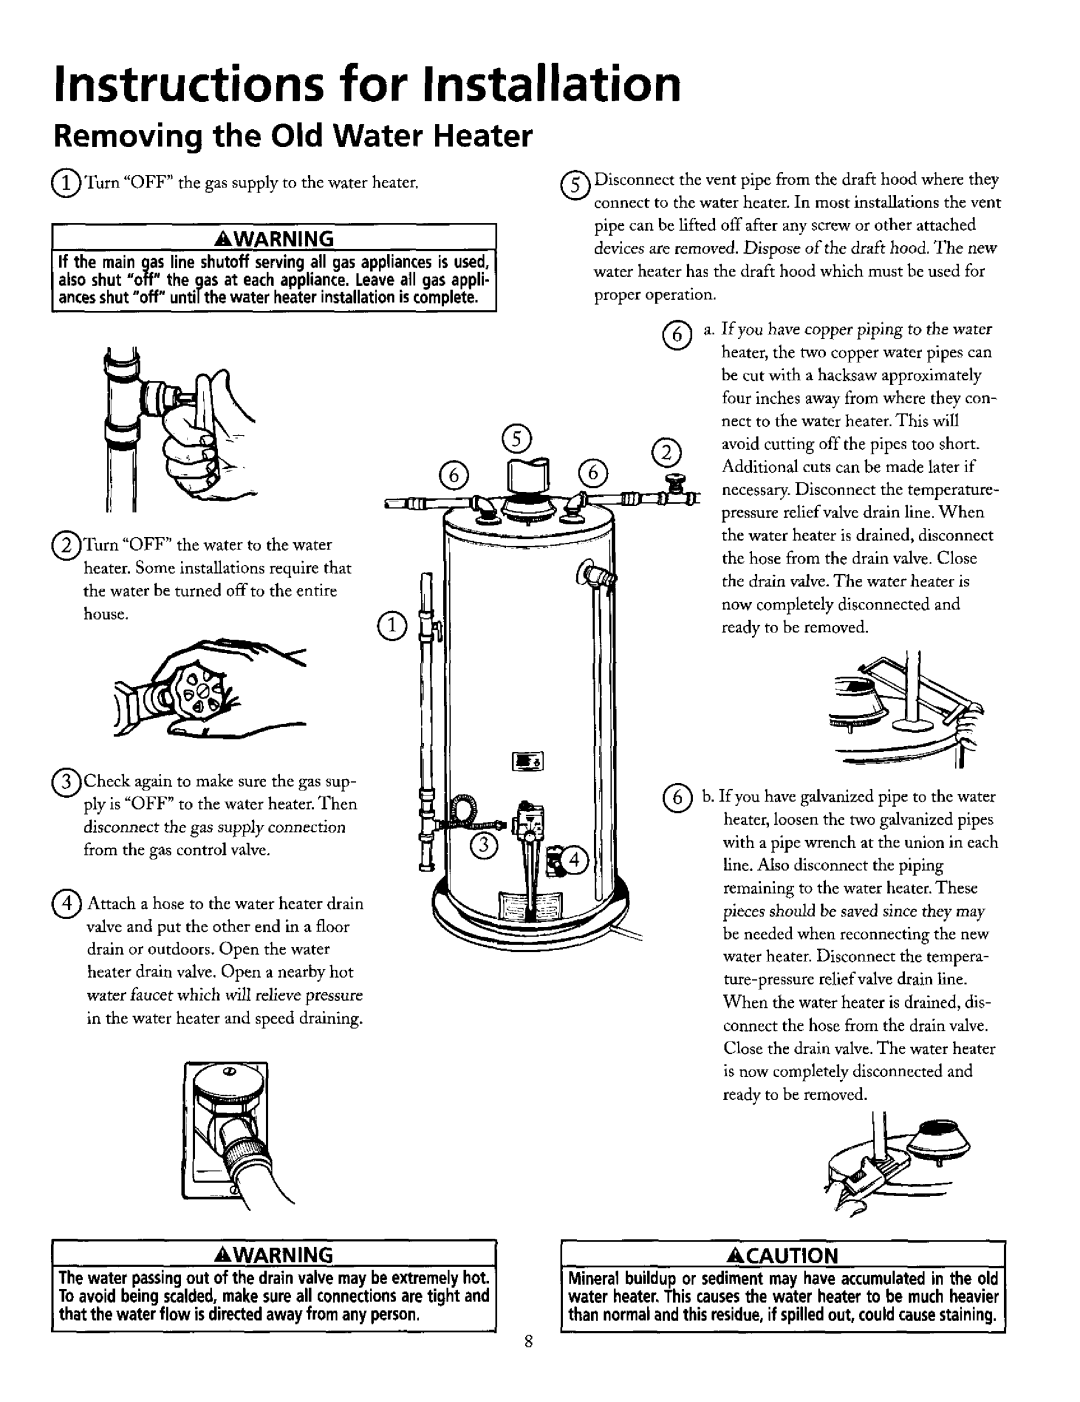 Maytag HN51240X, HN41240X manual Instructions for Installation, Removing the Old Water Heater 